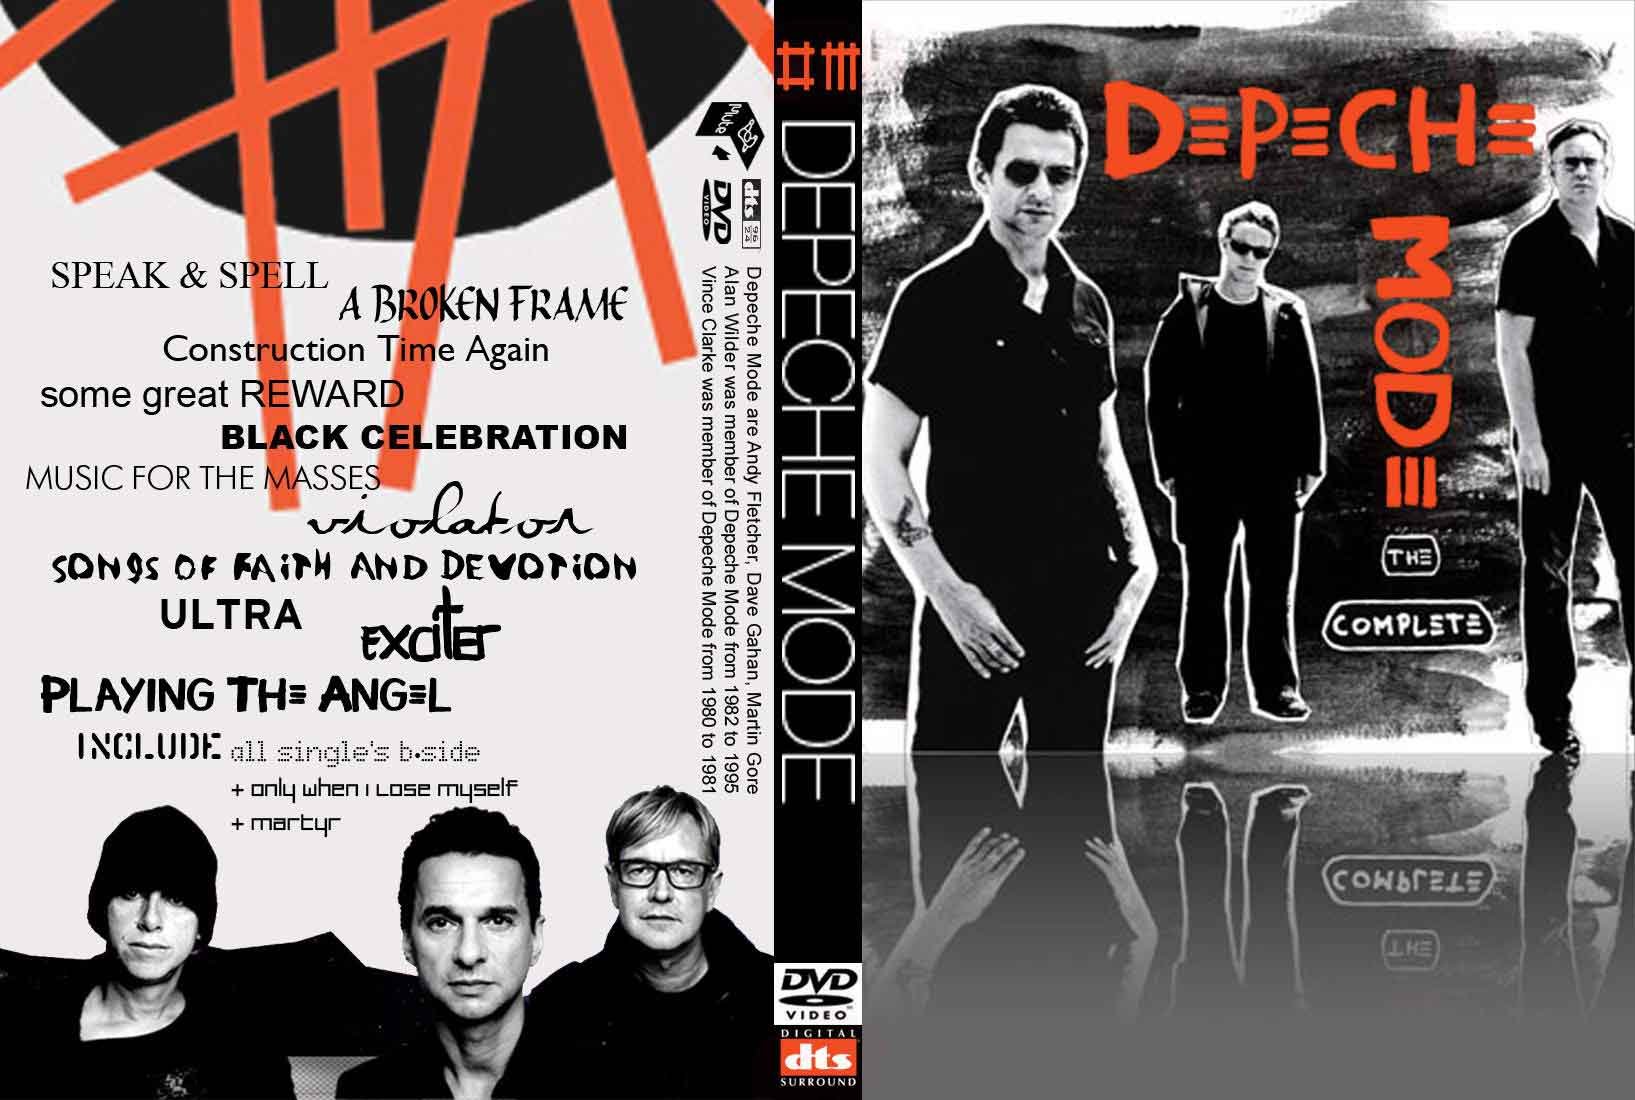 [ADVD][CO] Depeche Mode - The Complete In DTS - 2009 (   DTS   )